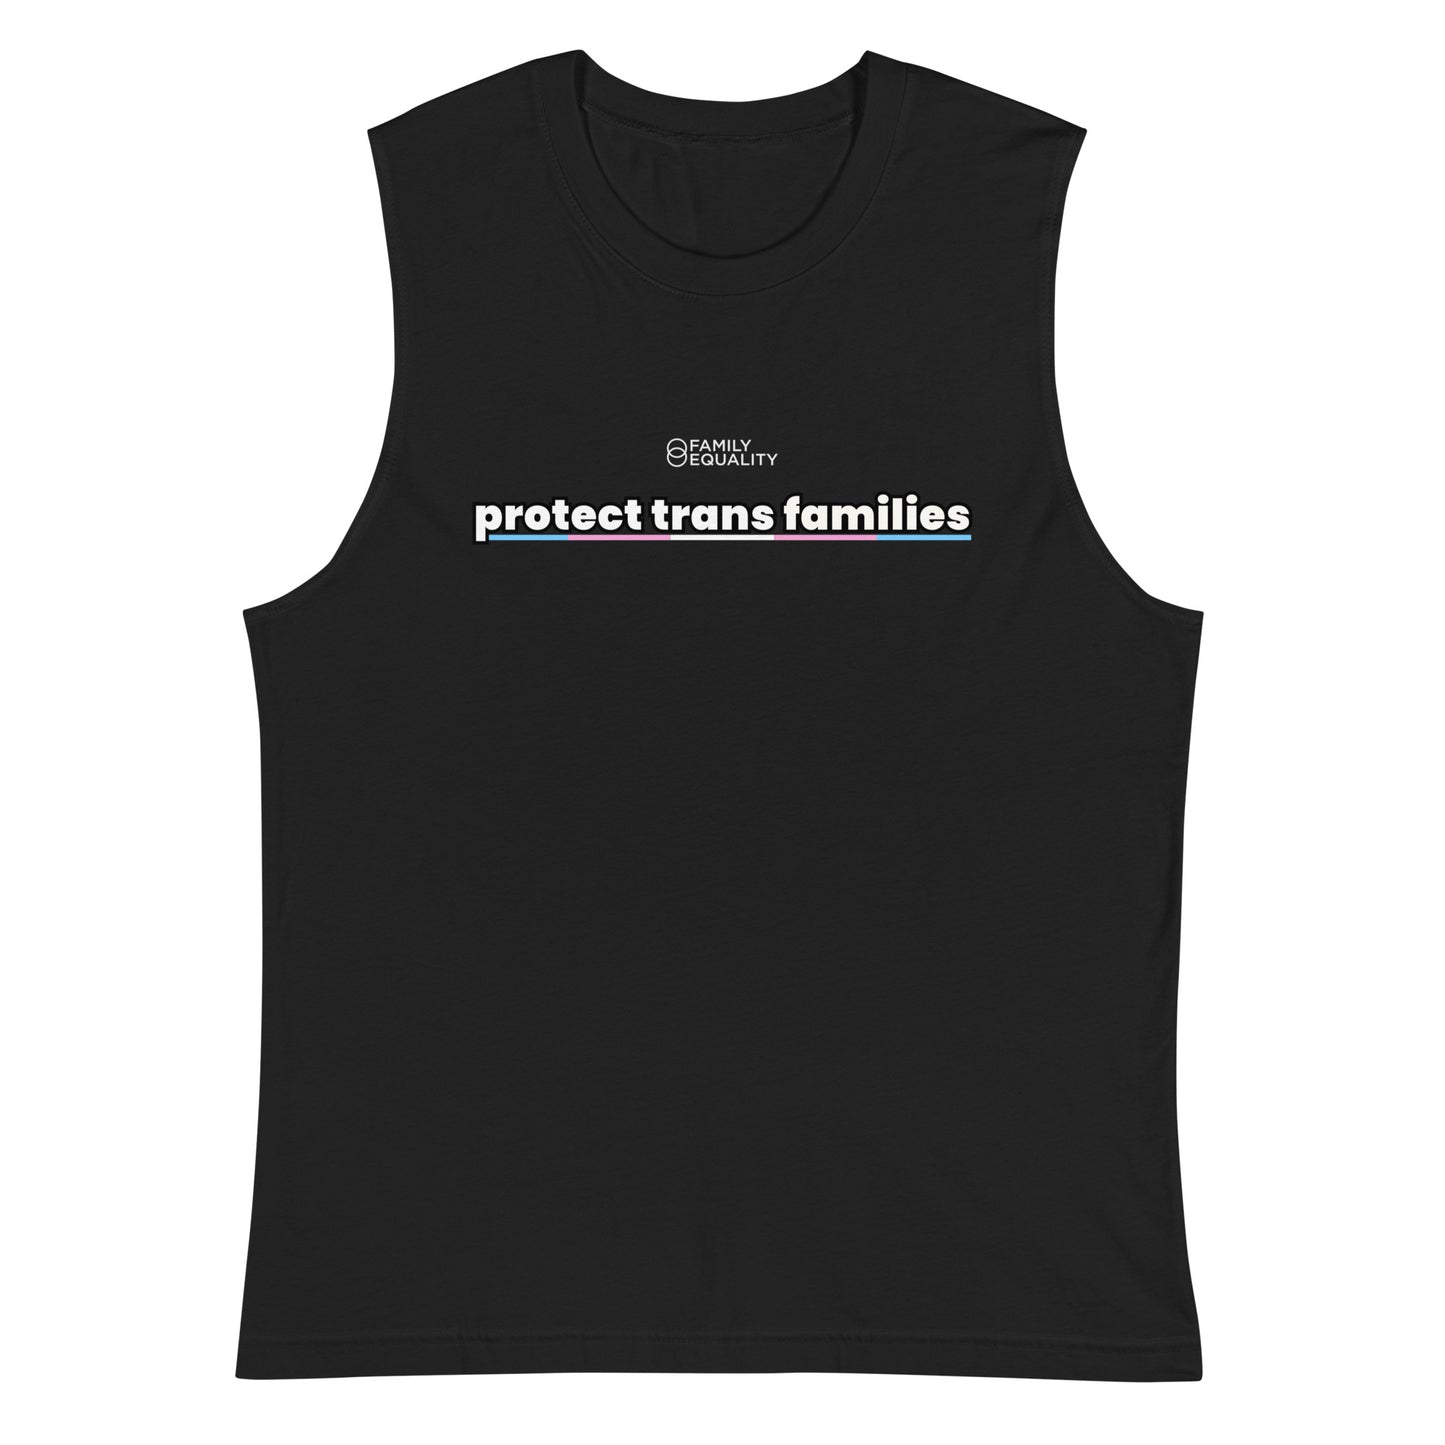 Protect Trans Families Muscle Shirt